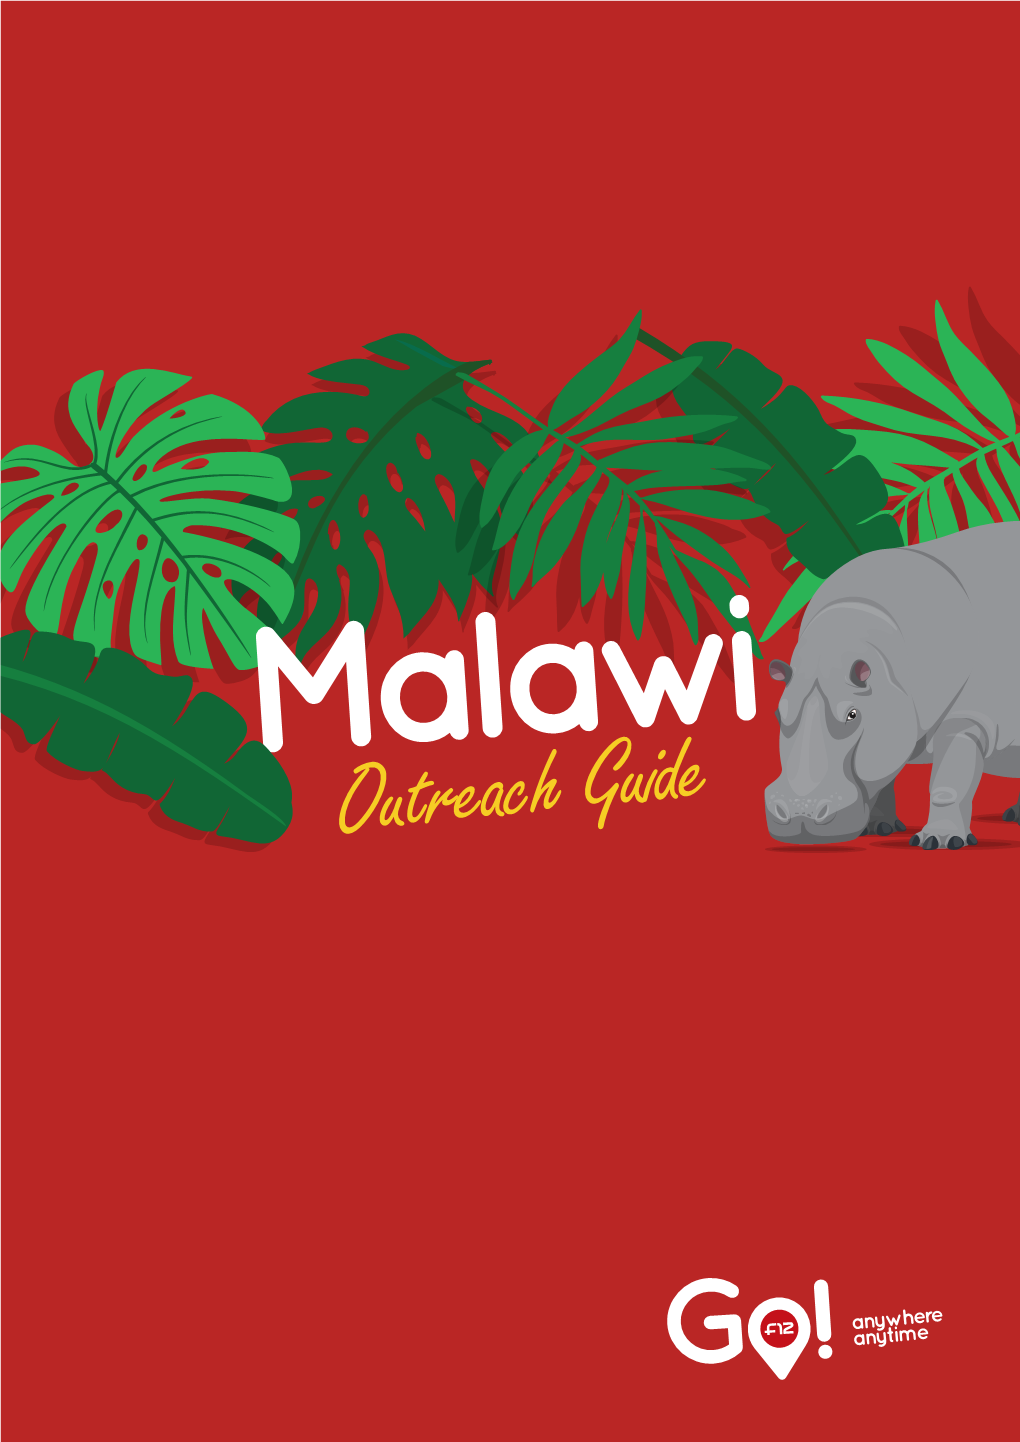 Malawi OUTREACH GUIDE by Lance Mcintosh